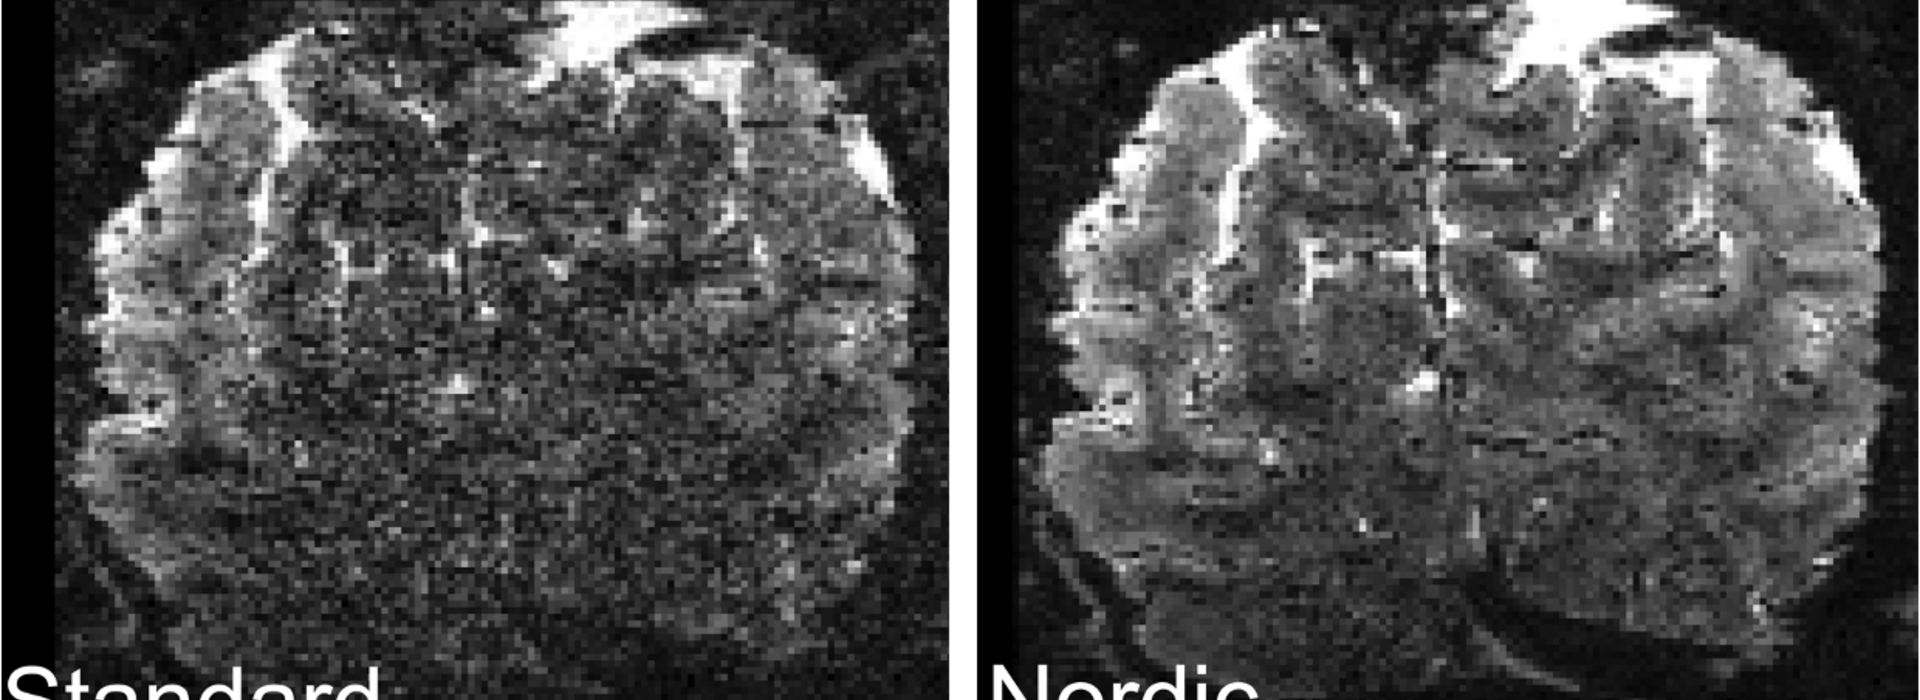 fMRI images of brain slices